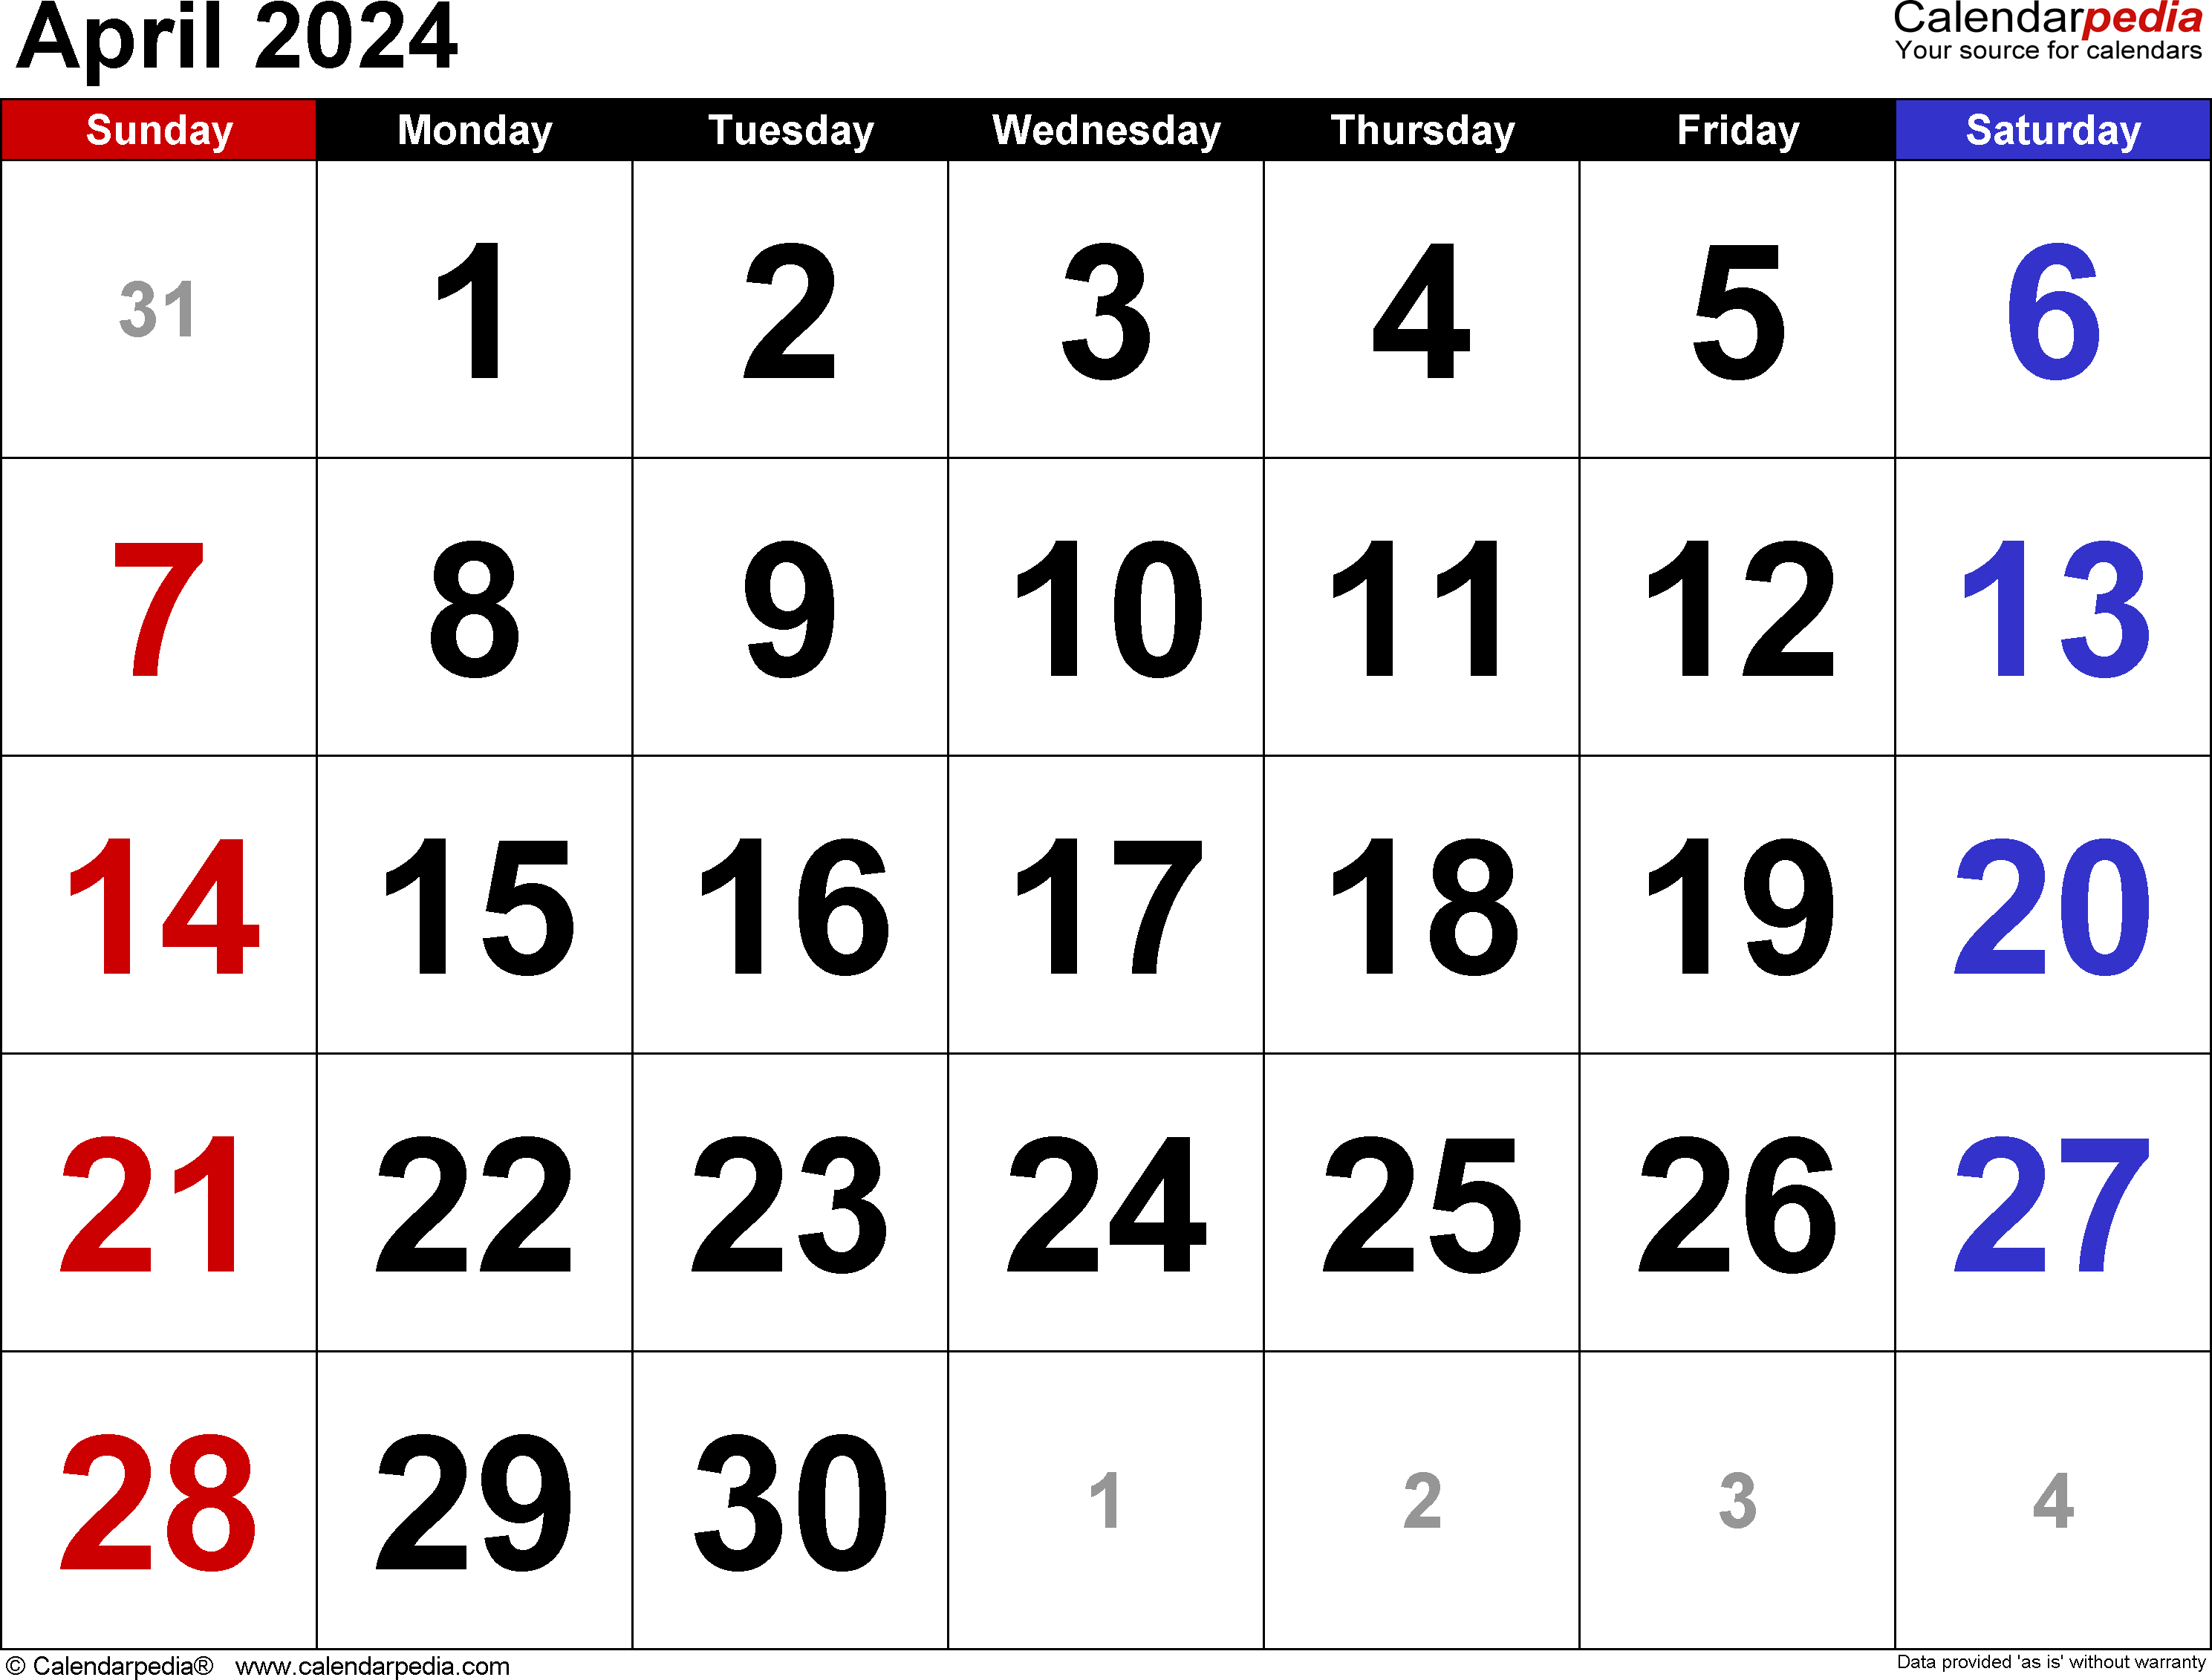 April 2024 Calendar | Templates For Word, Excel And Pdf pertaining to Free Printable April 2024 Calendar Large